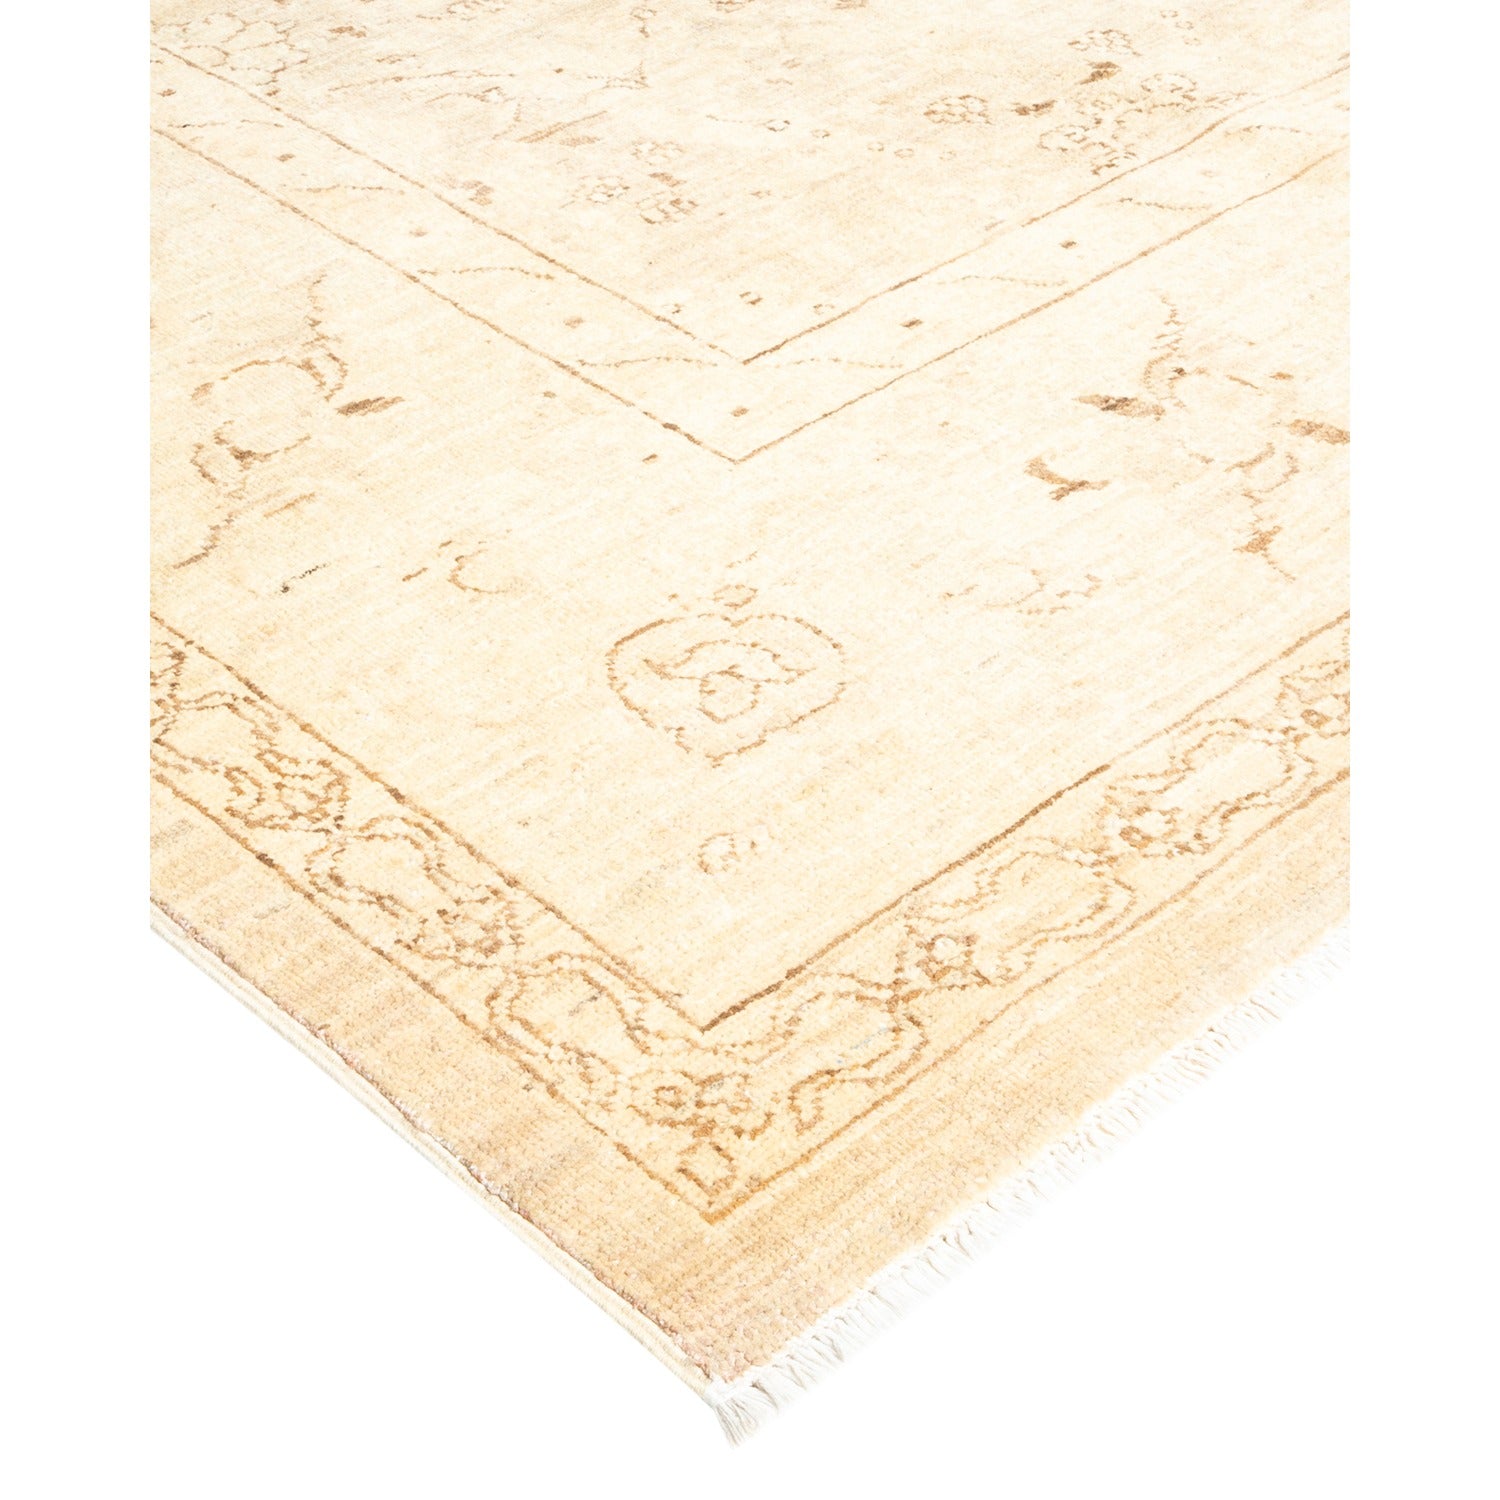 Handwoven light-colored area rug with floral and geometric designs.